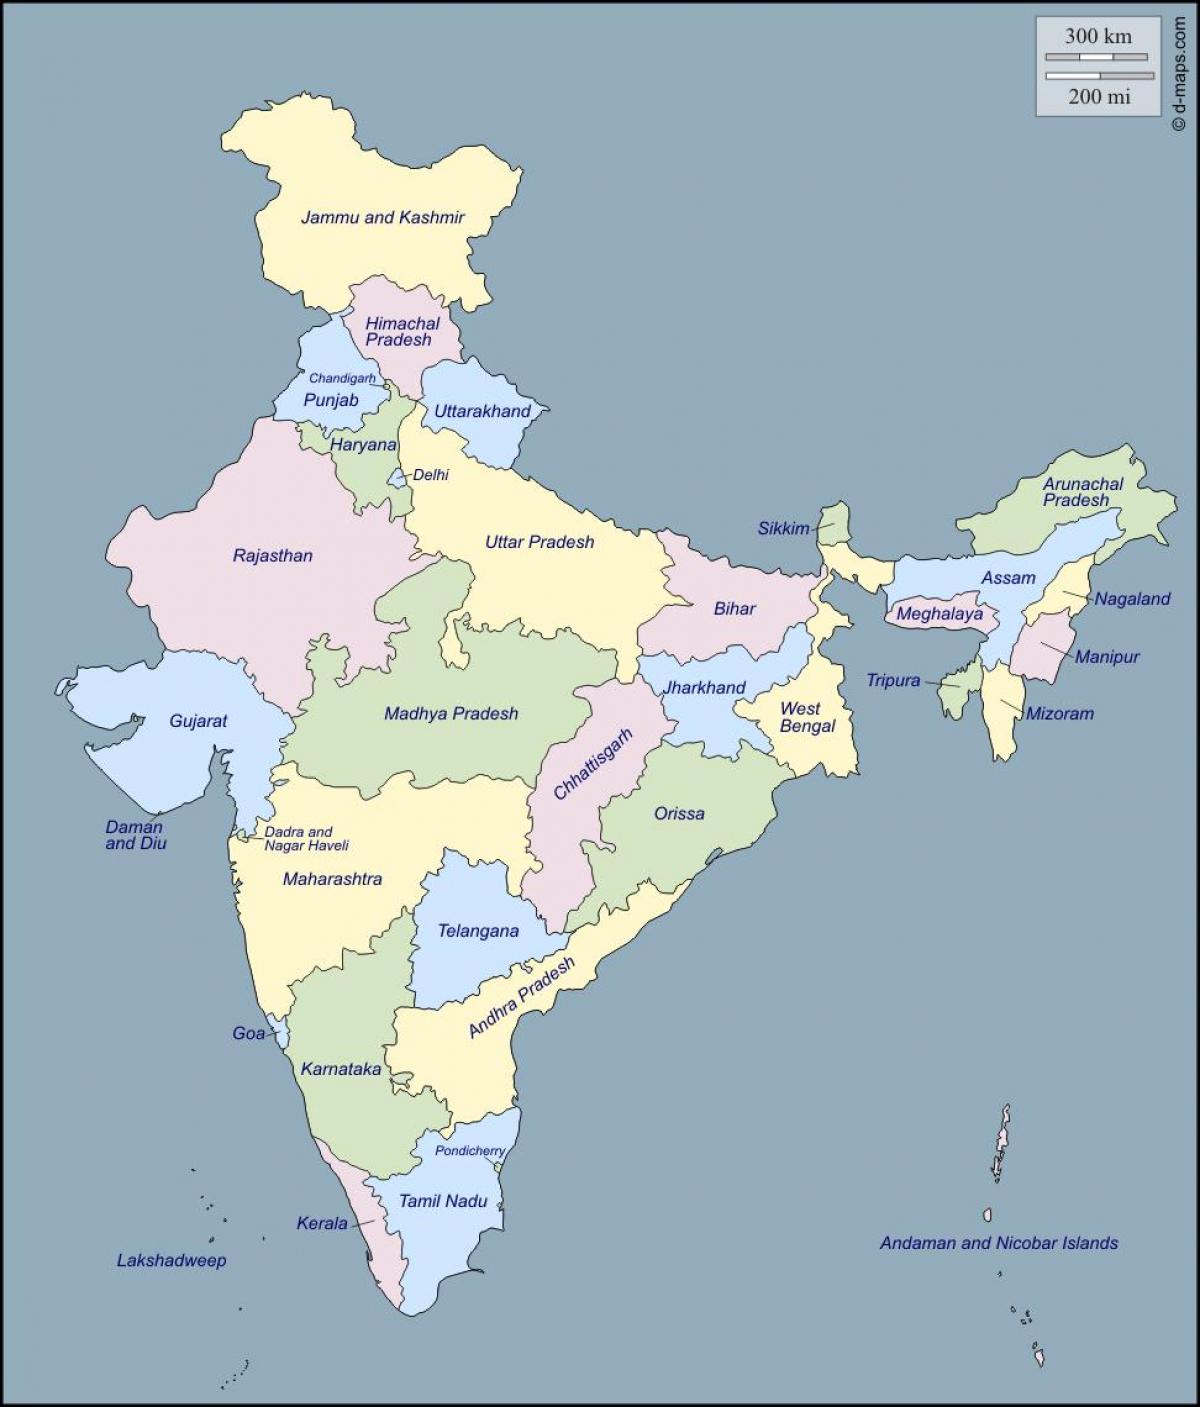 India map with names of states